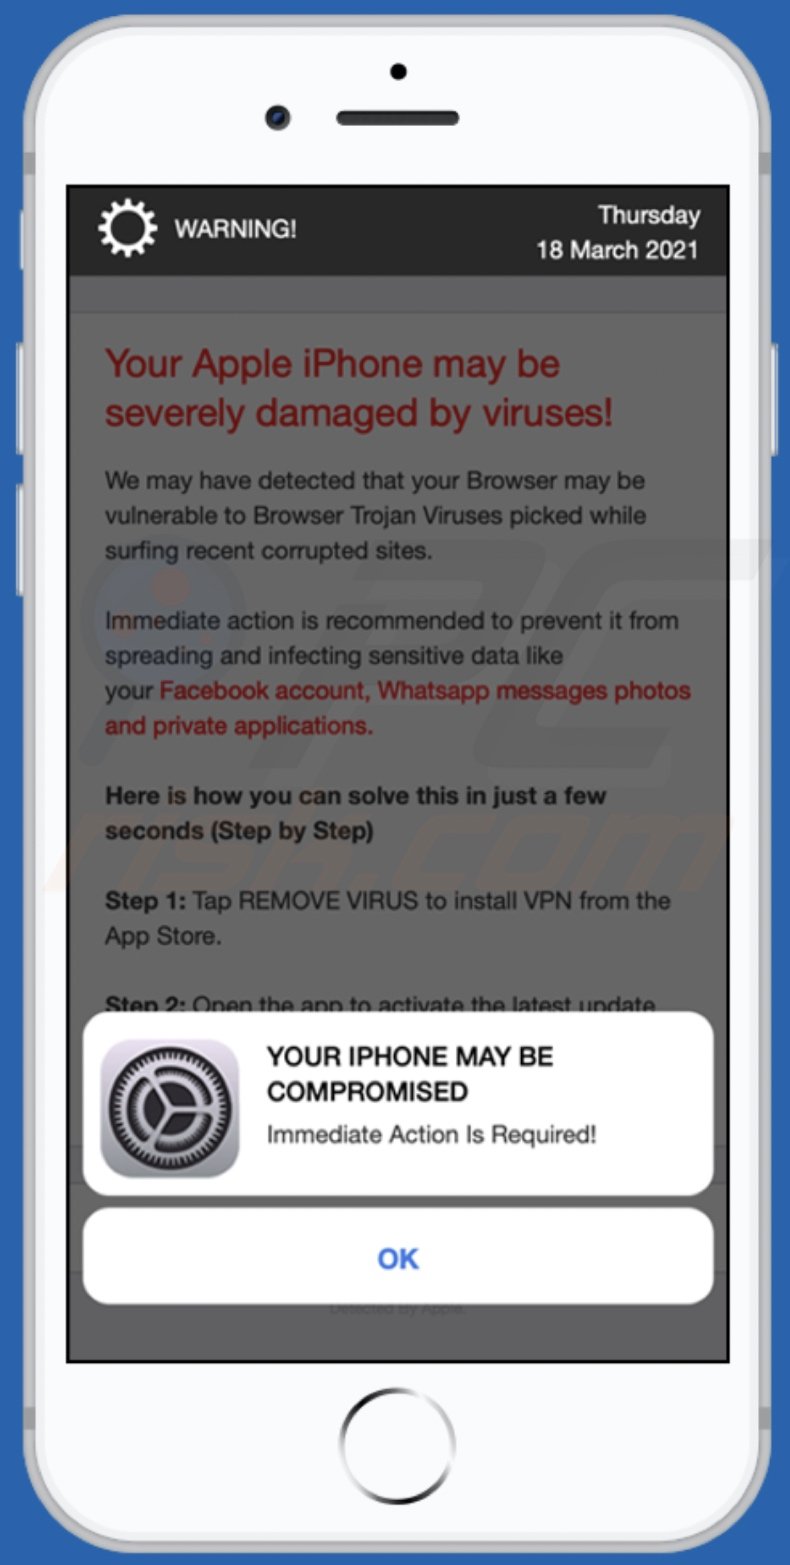 Your Apple iPhone may be severely damaged by viruses! scam pop-up